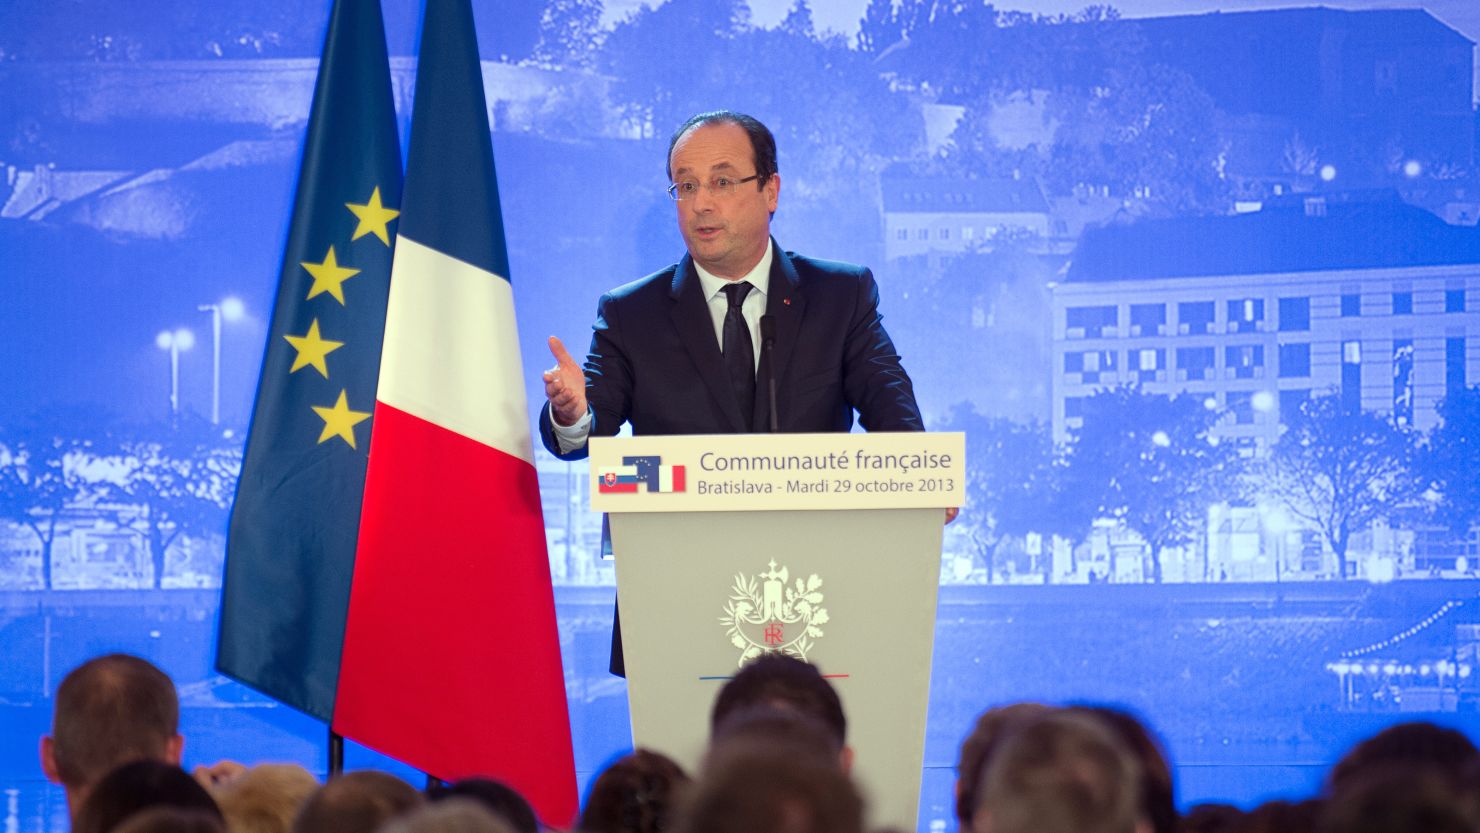 French President Francois Hollande announces the release of four French hostages during his visit to Slovakia.